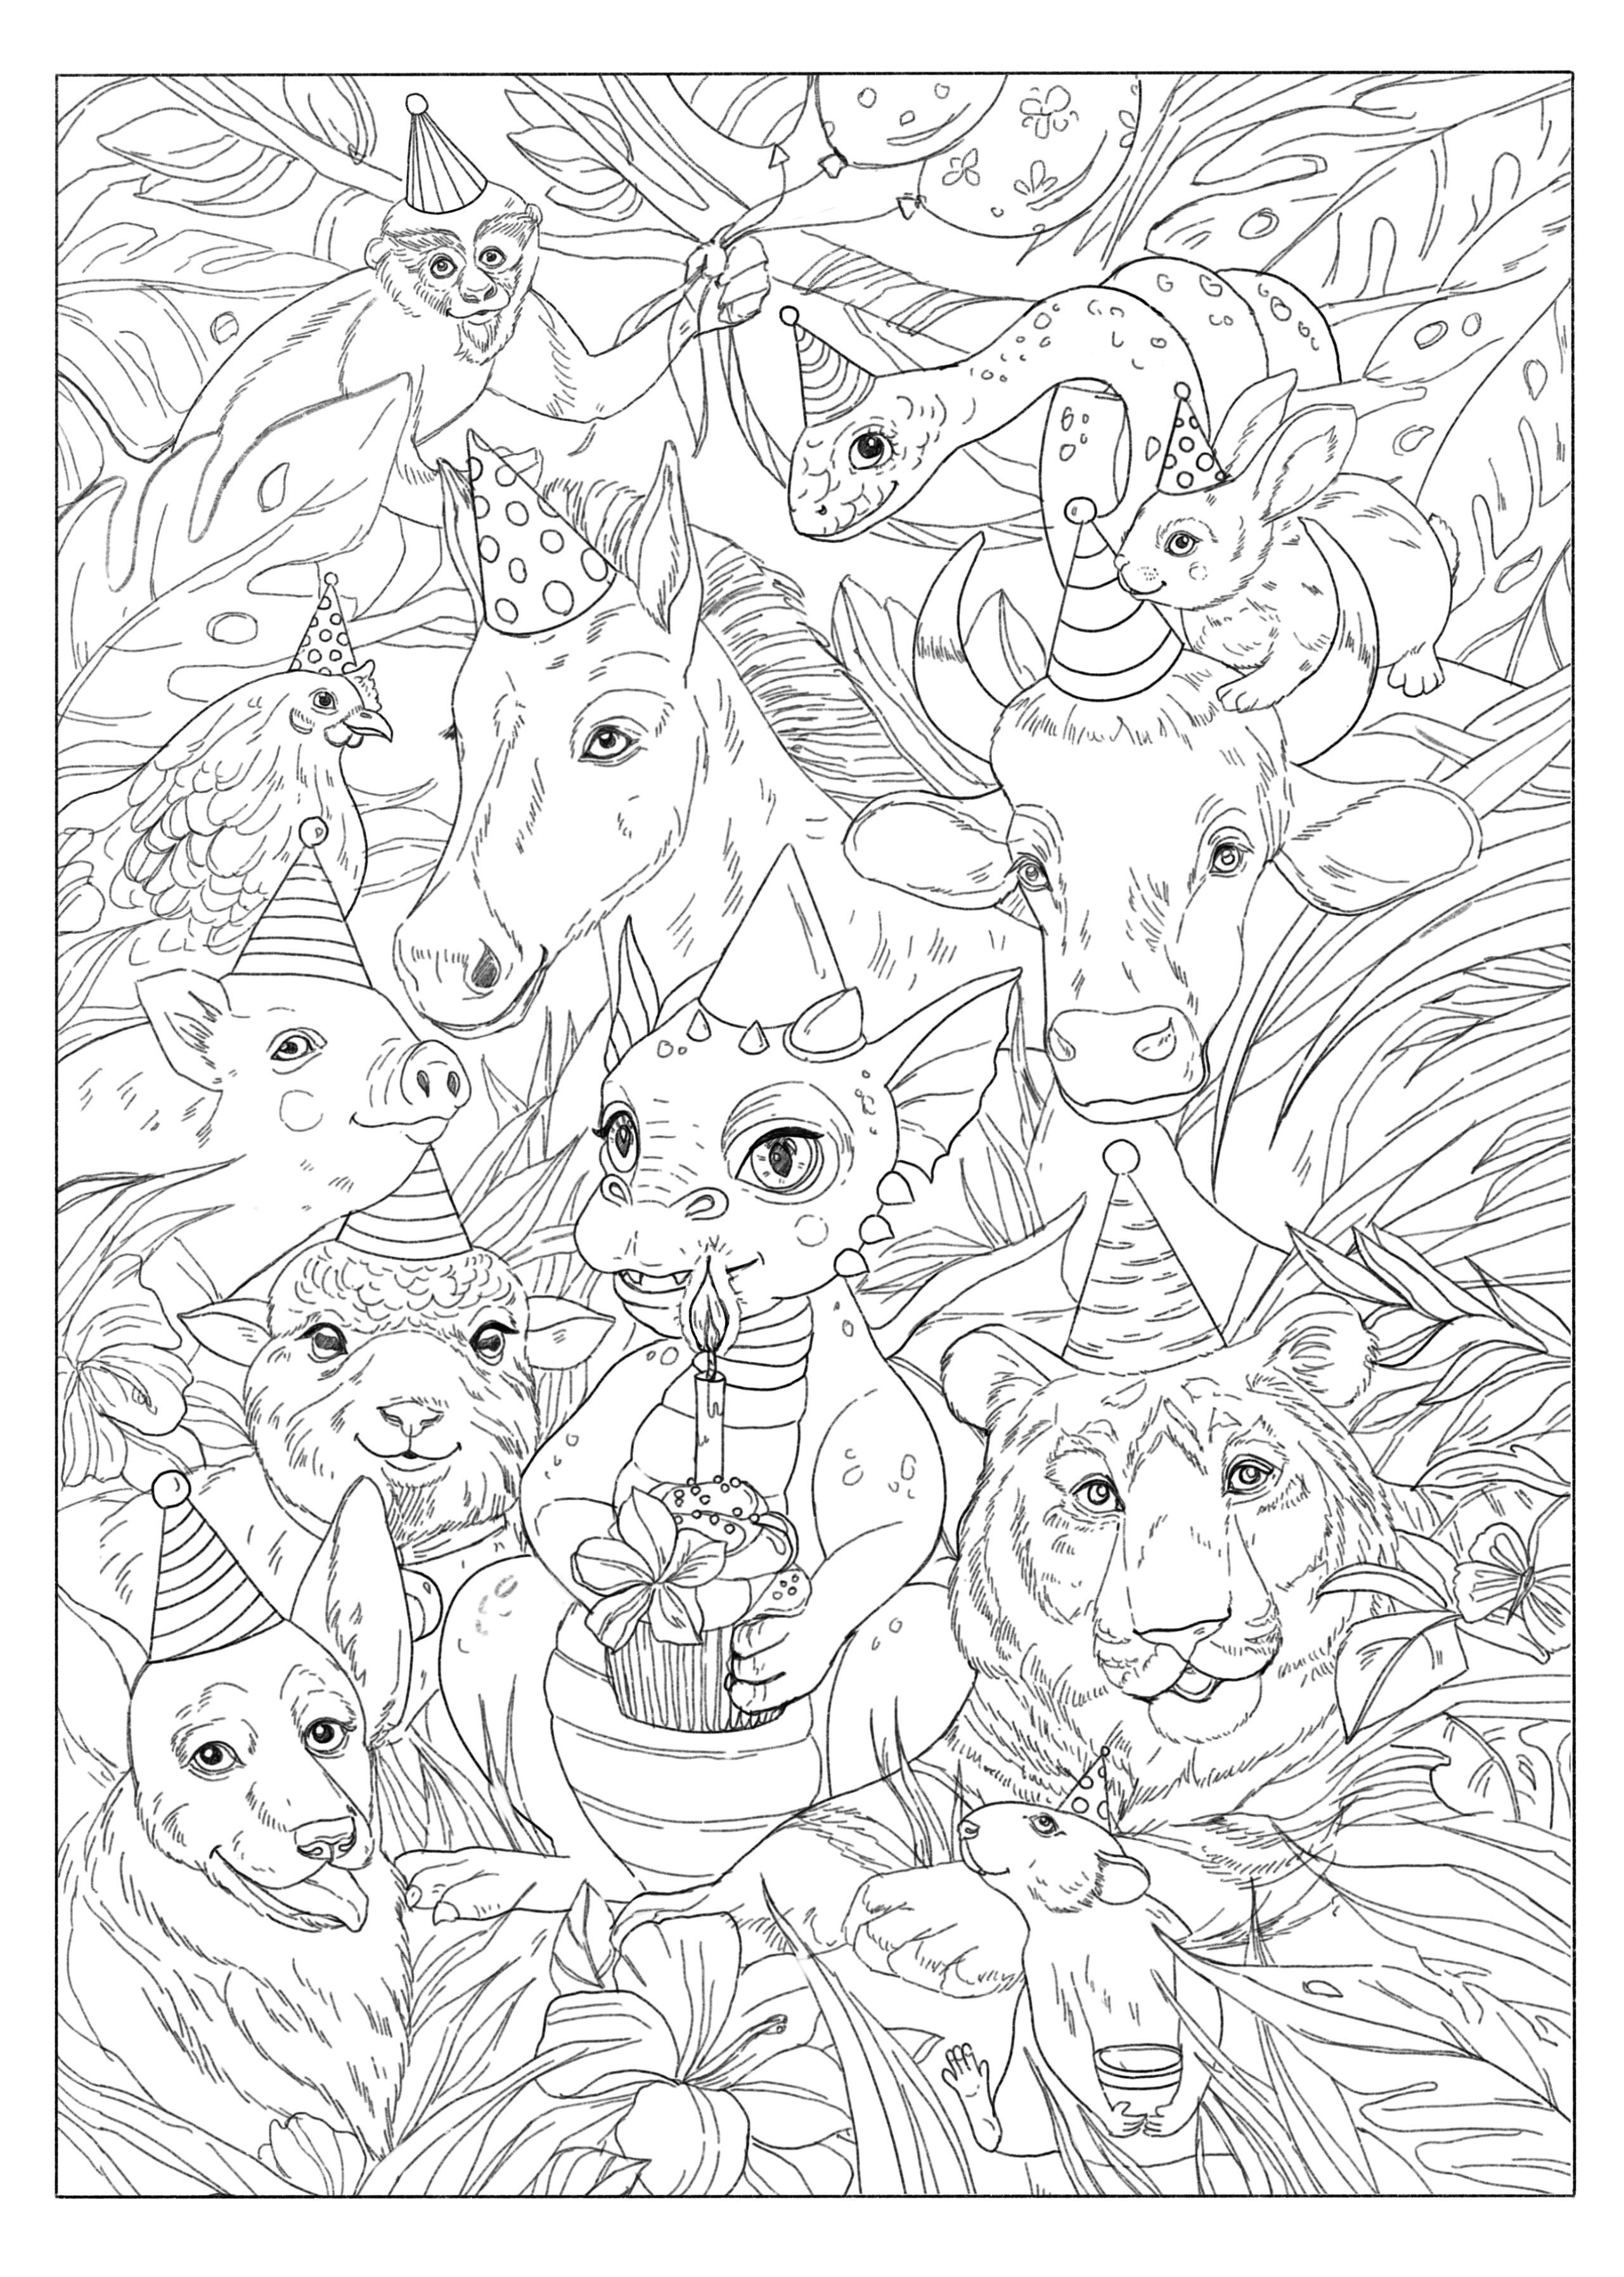 The Great Race Coloring Page (Digital Download) -  Camp Hollow